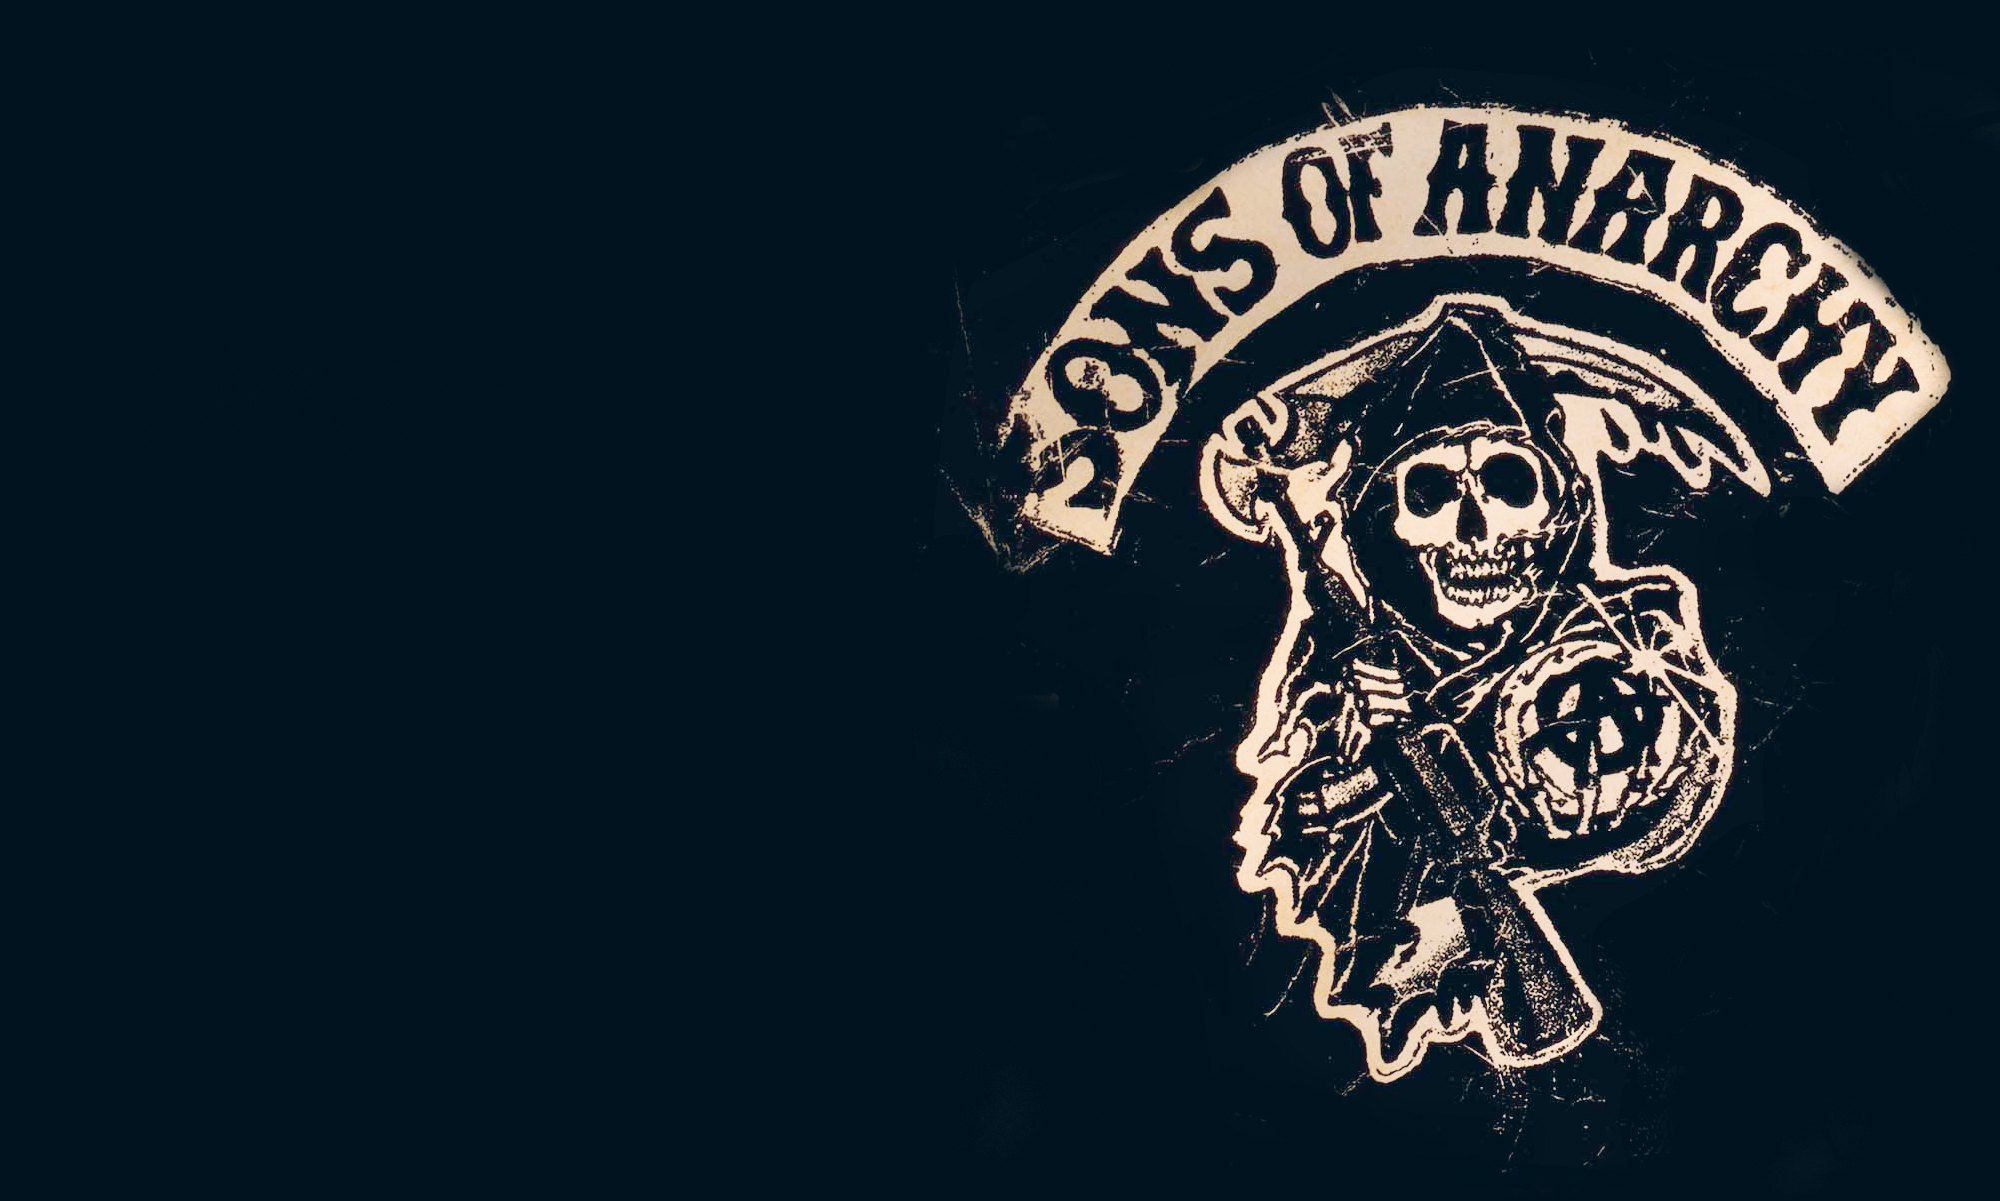 Sons Of Anarchy Wallpapers and Background Images   stmednet